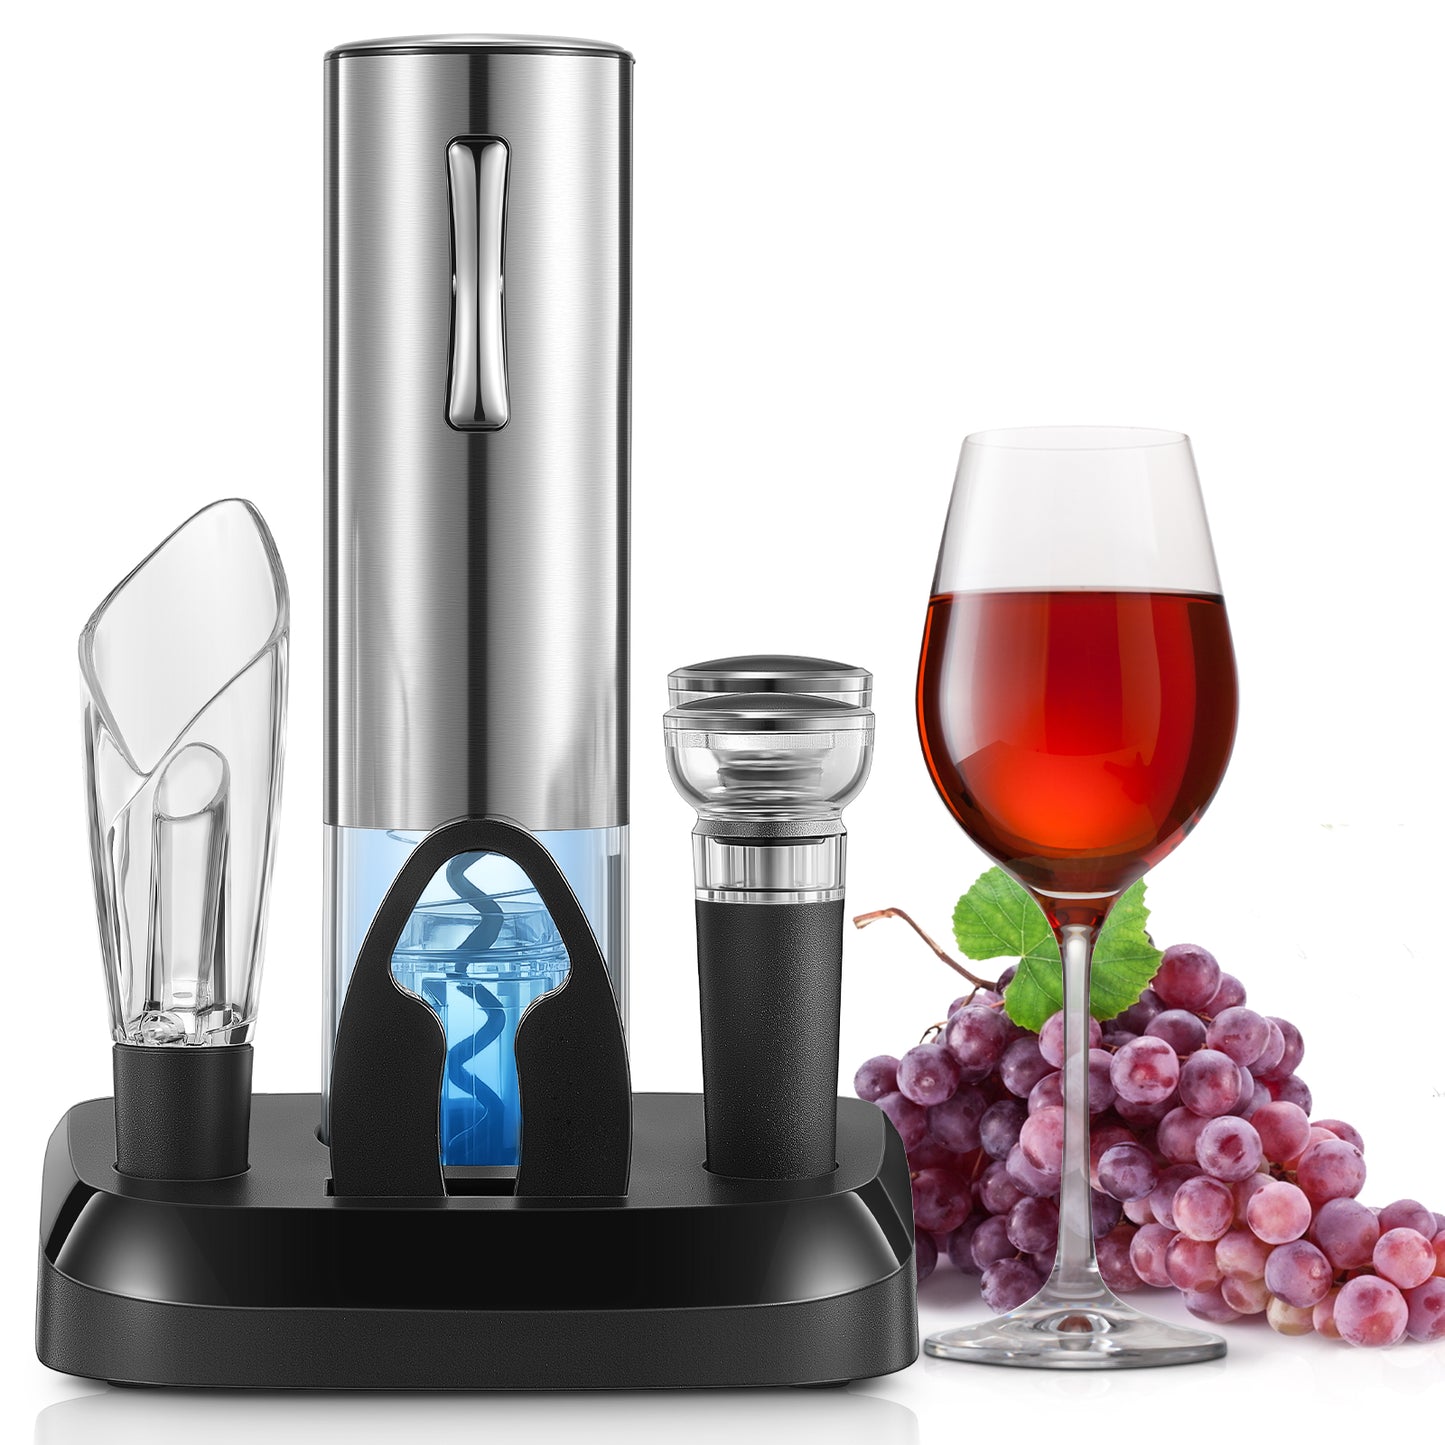 Electric Wine Opener, Cordless Automatic Electric Wine Bottle Opener with Charging Base, Vacuum Freshener with 2 Stoppers, Foil Cutter,Wine Pourer,Adaptor